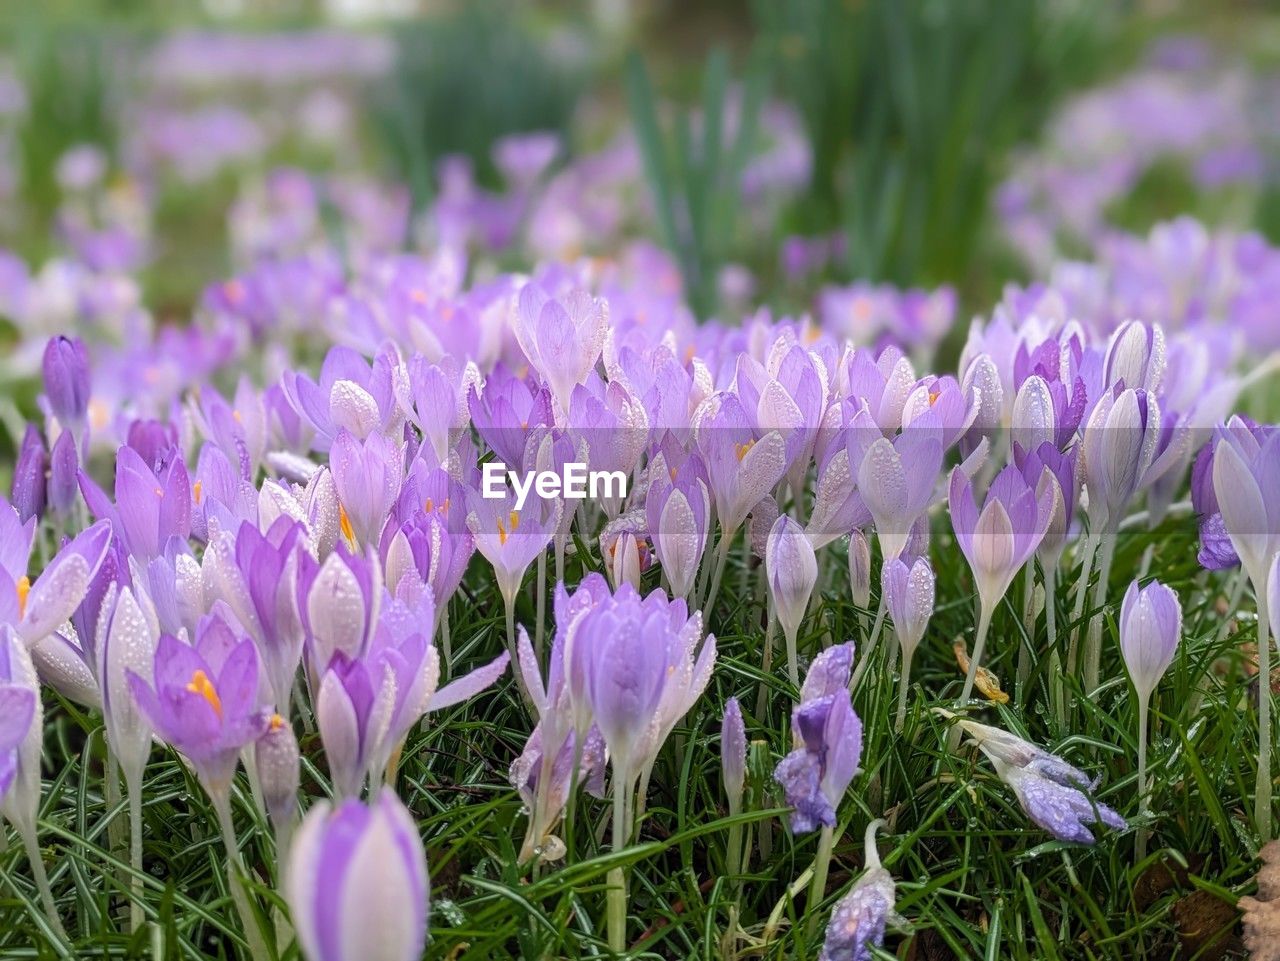 flower, flowering plant, plant, purple, freshness, beauty in nature, nature, crocus, growth, fragility, field, land, close-up, no people, springtime, petal, flowerbed, iris, blossom, selective focus, flower head, outdoors, inflorescence, grass, lavender, environment, day, meadow, focus on foreground, botany, landscape